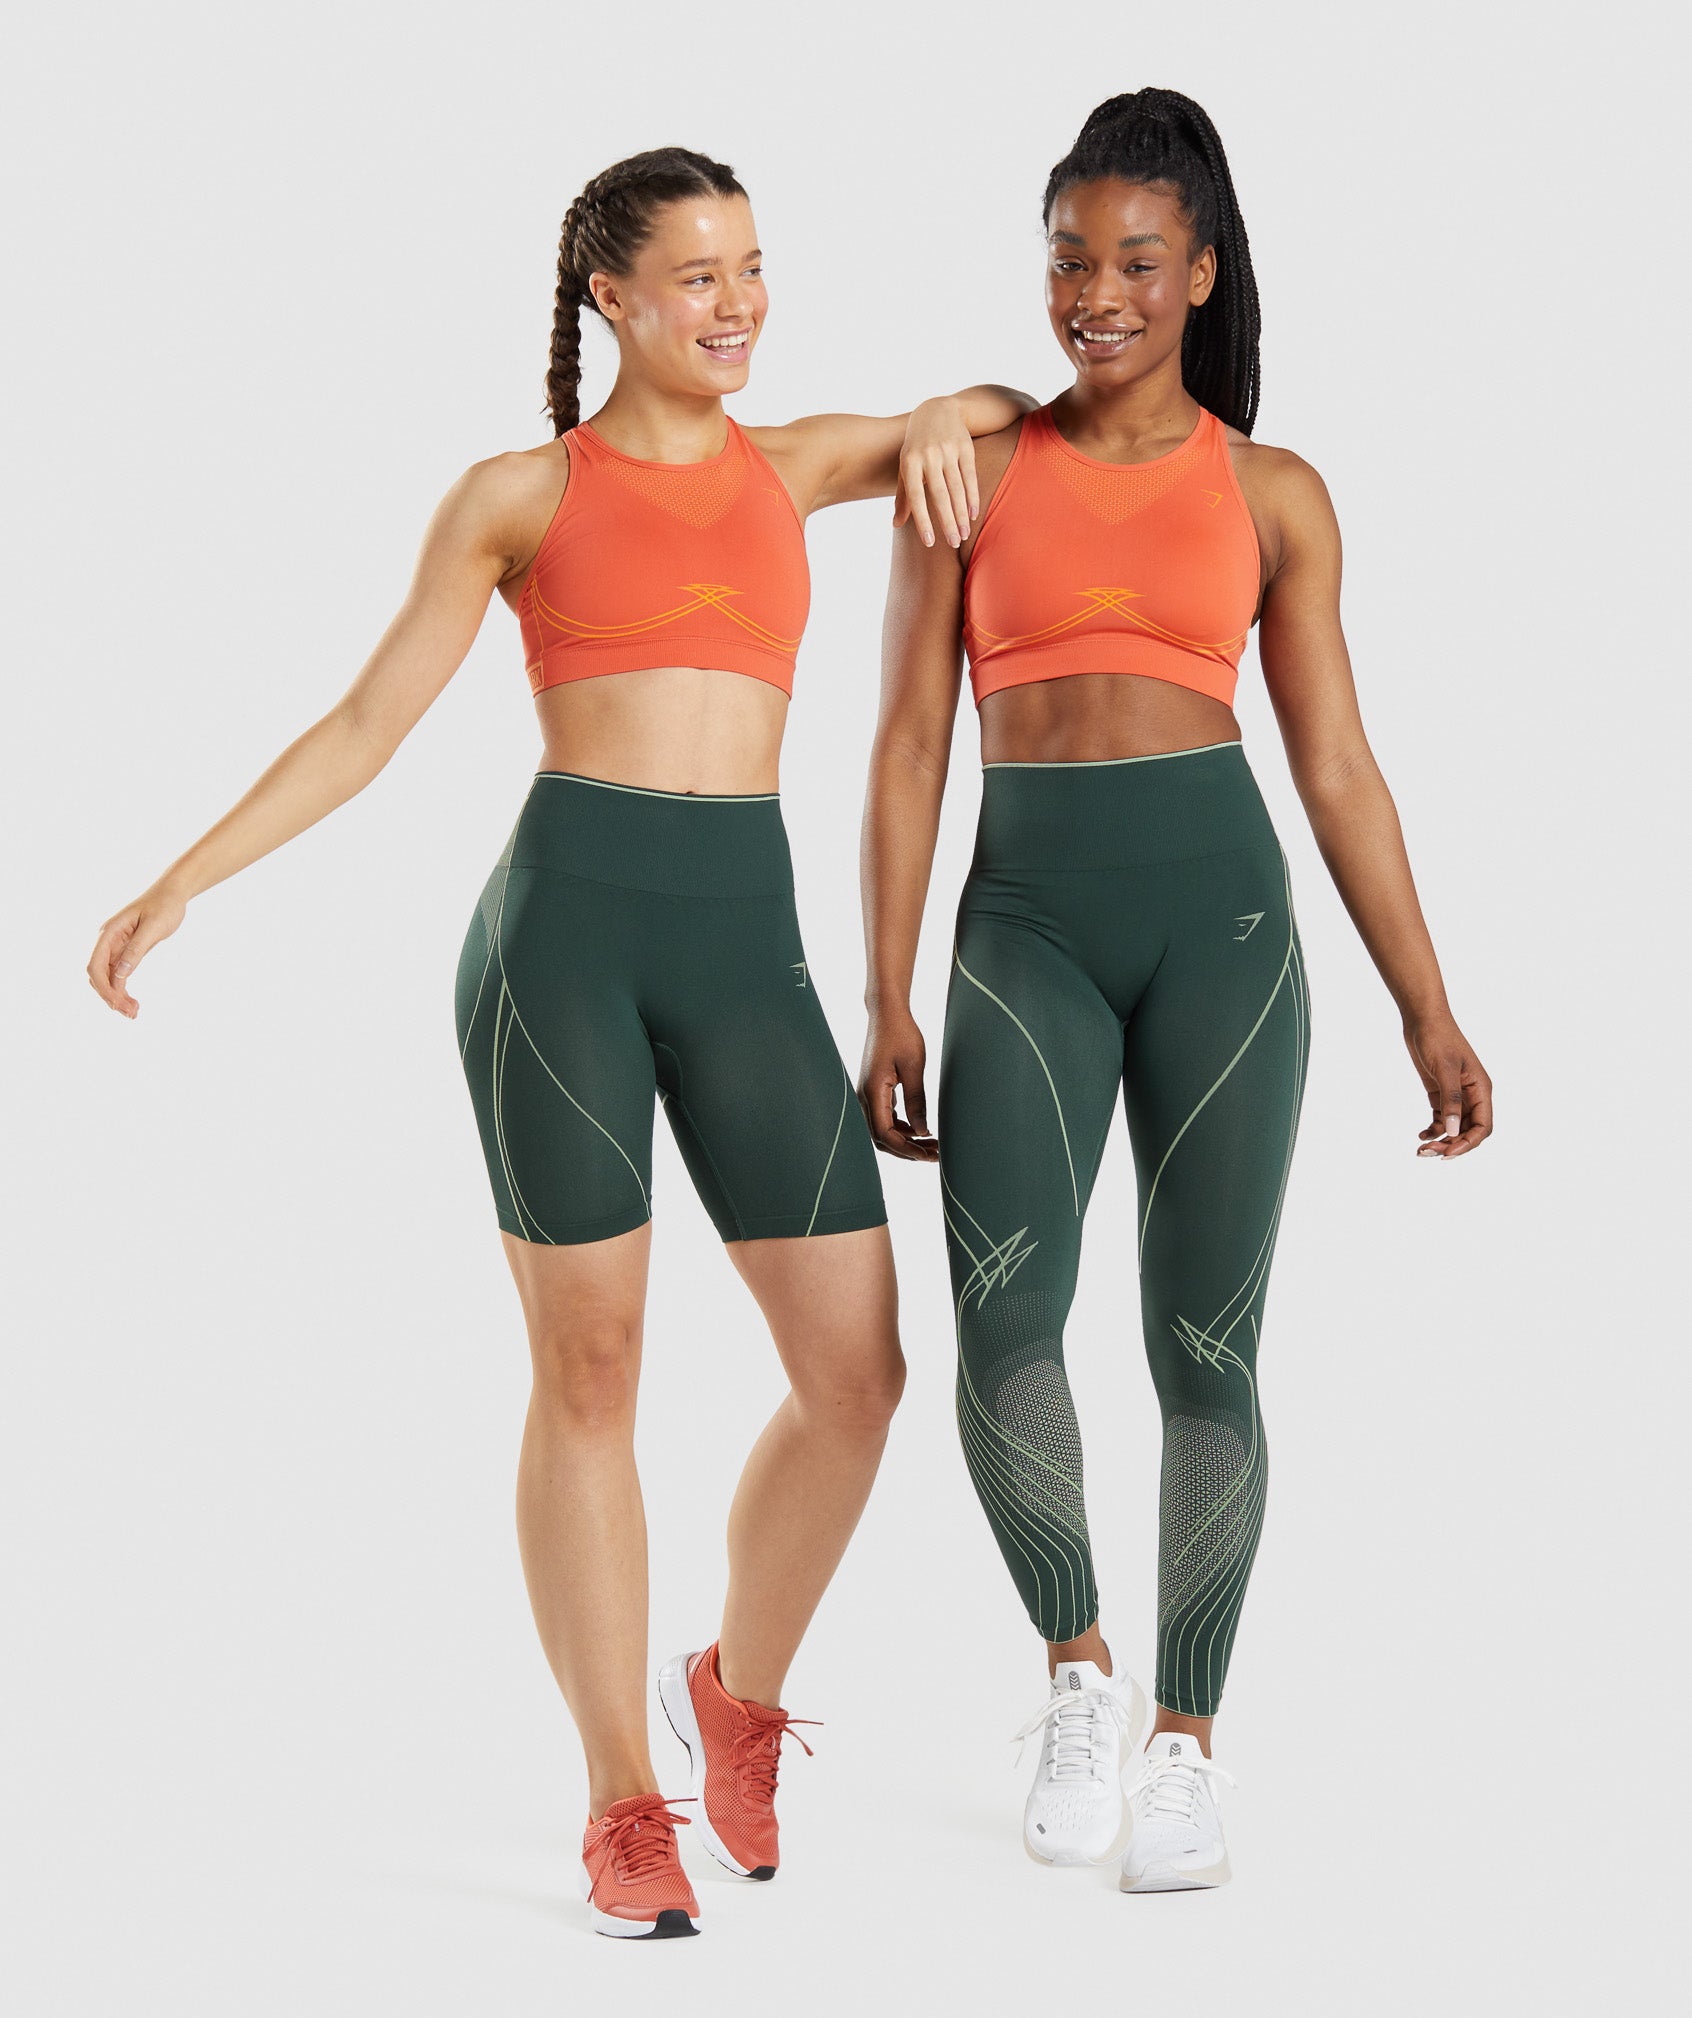 New Compression Leggings & Sports Bras For Women